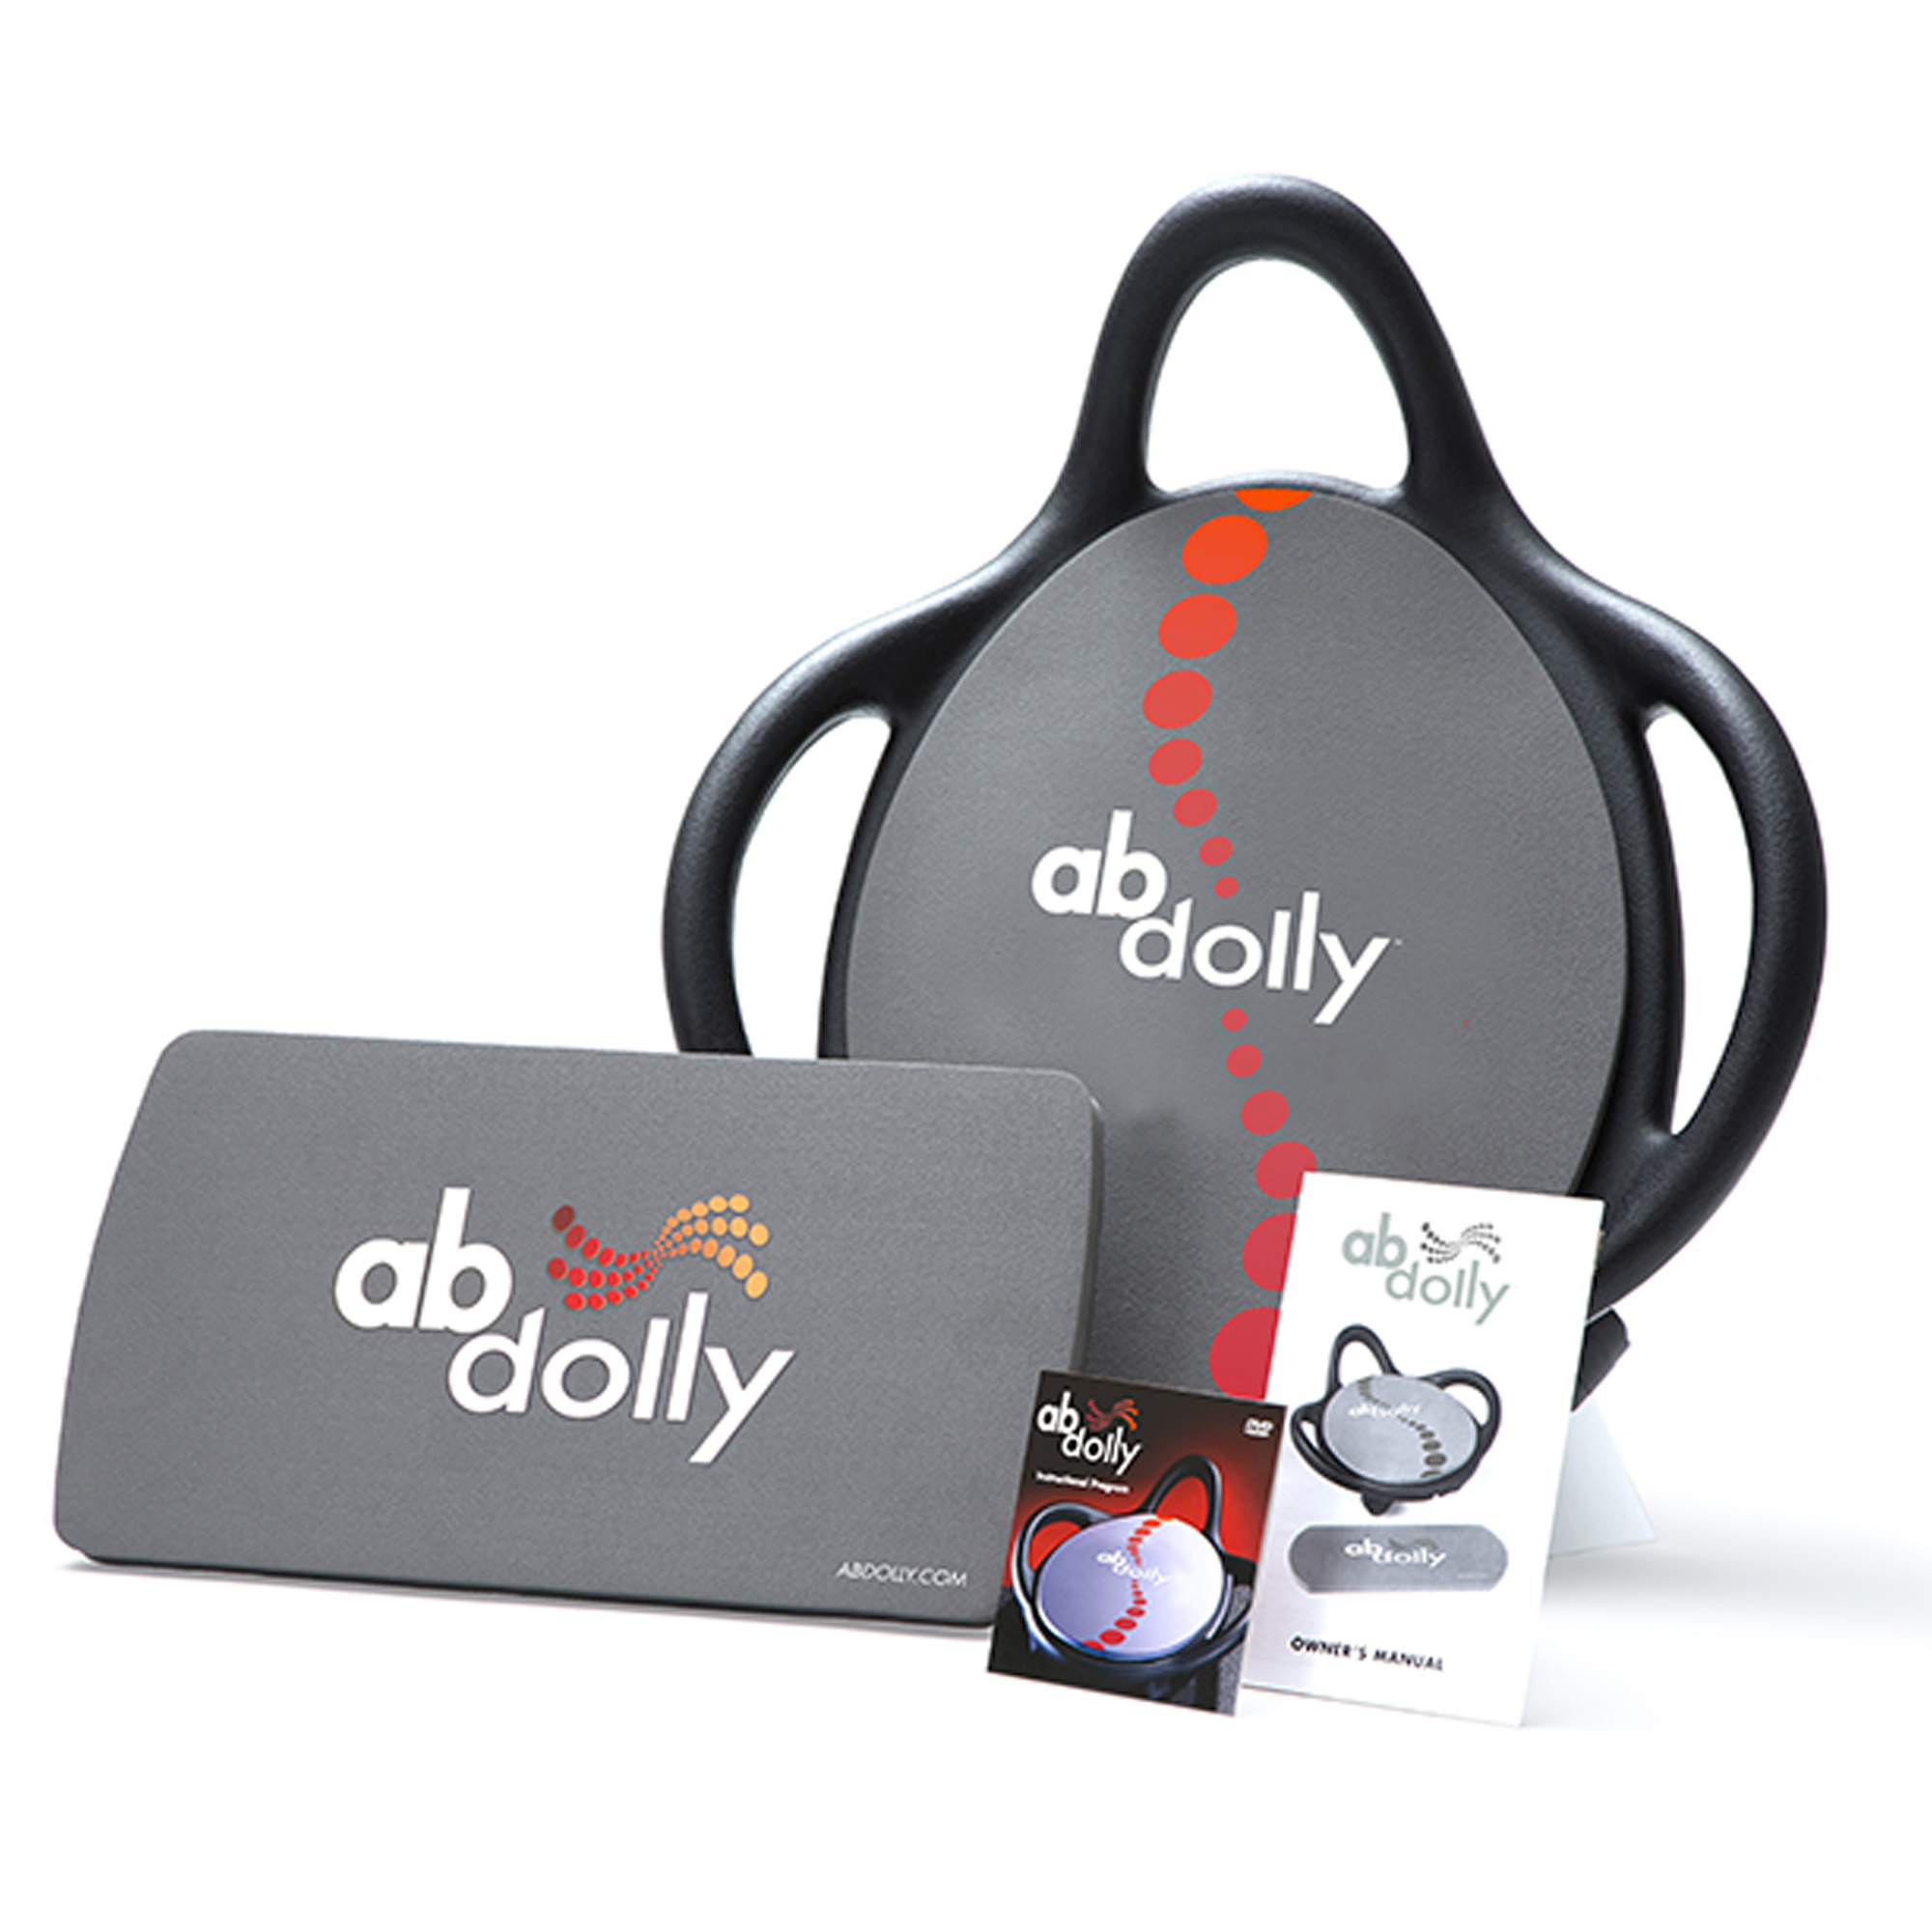 AB Dolly Home Fitness Abdominal Exercise Machine Equipment w/ Workout DVD - image 1 of 4